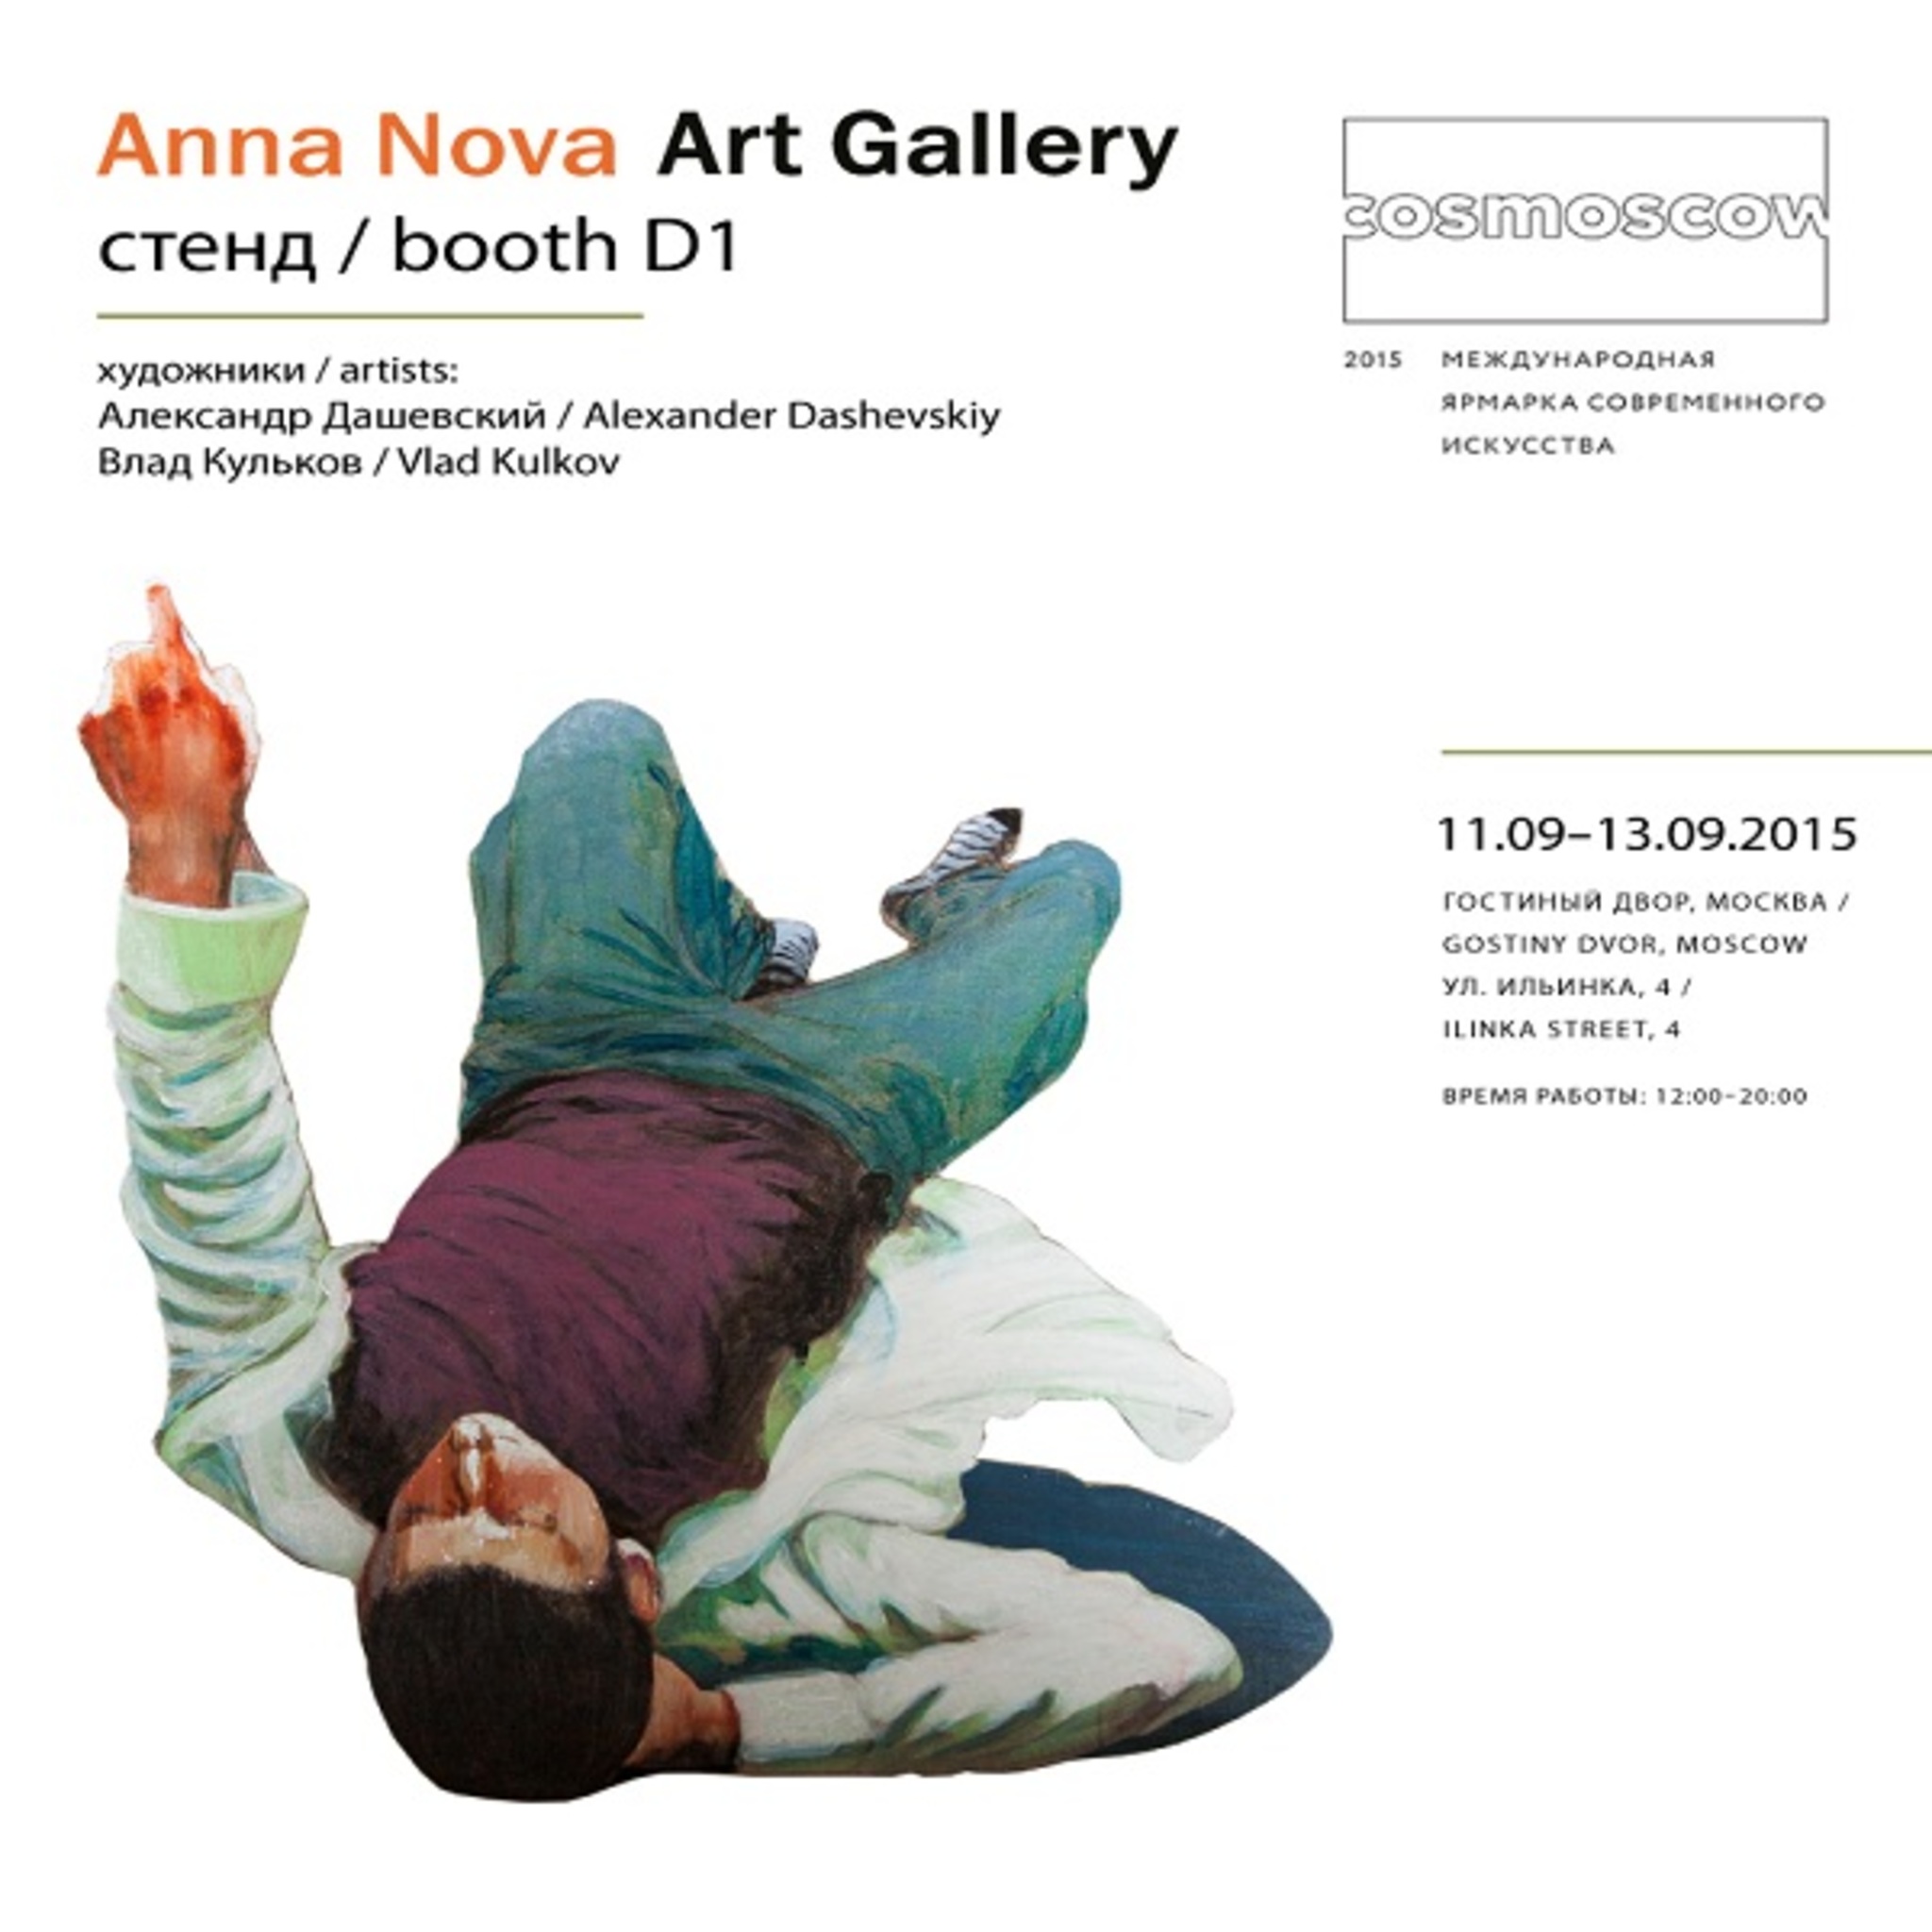 Anna Nova Gallery is taking part in the International Fair Cosmoscow 2015